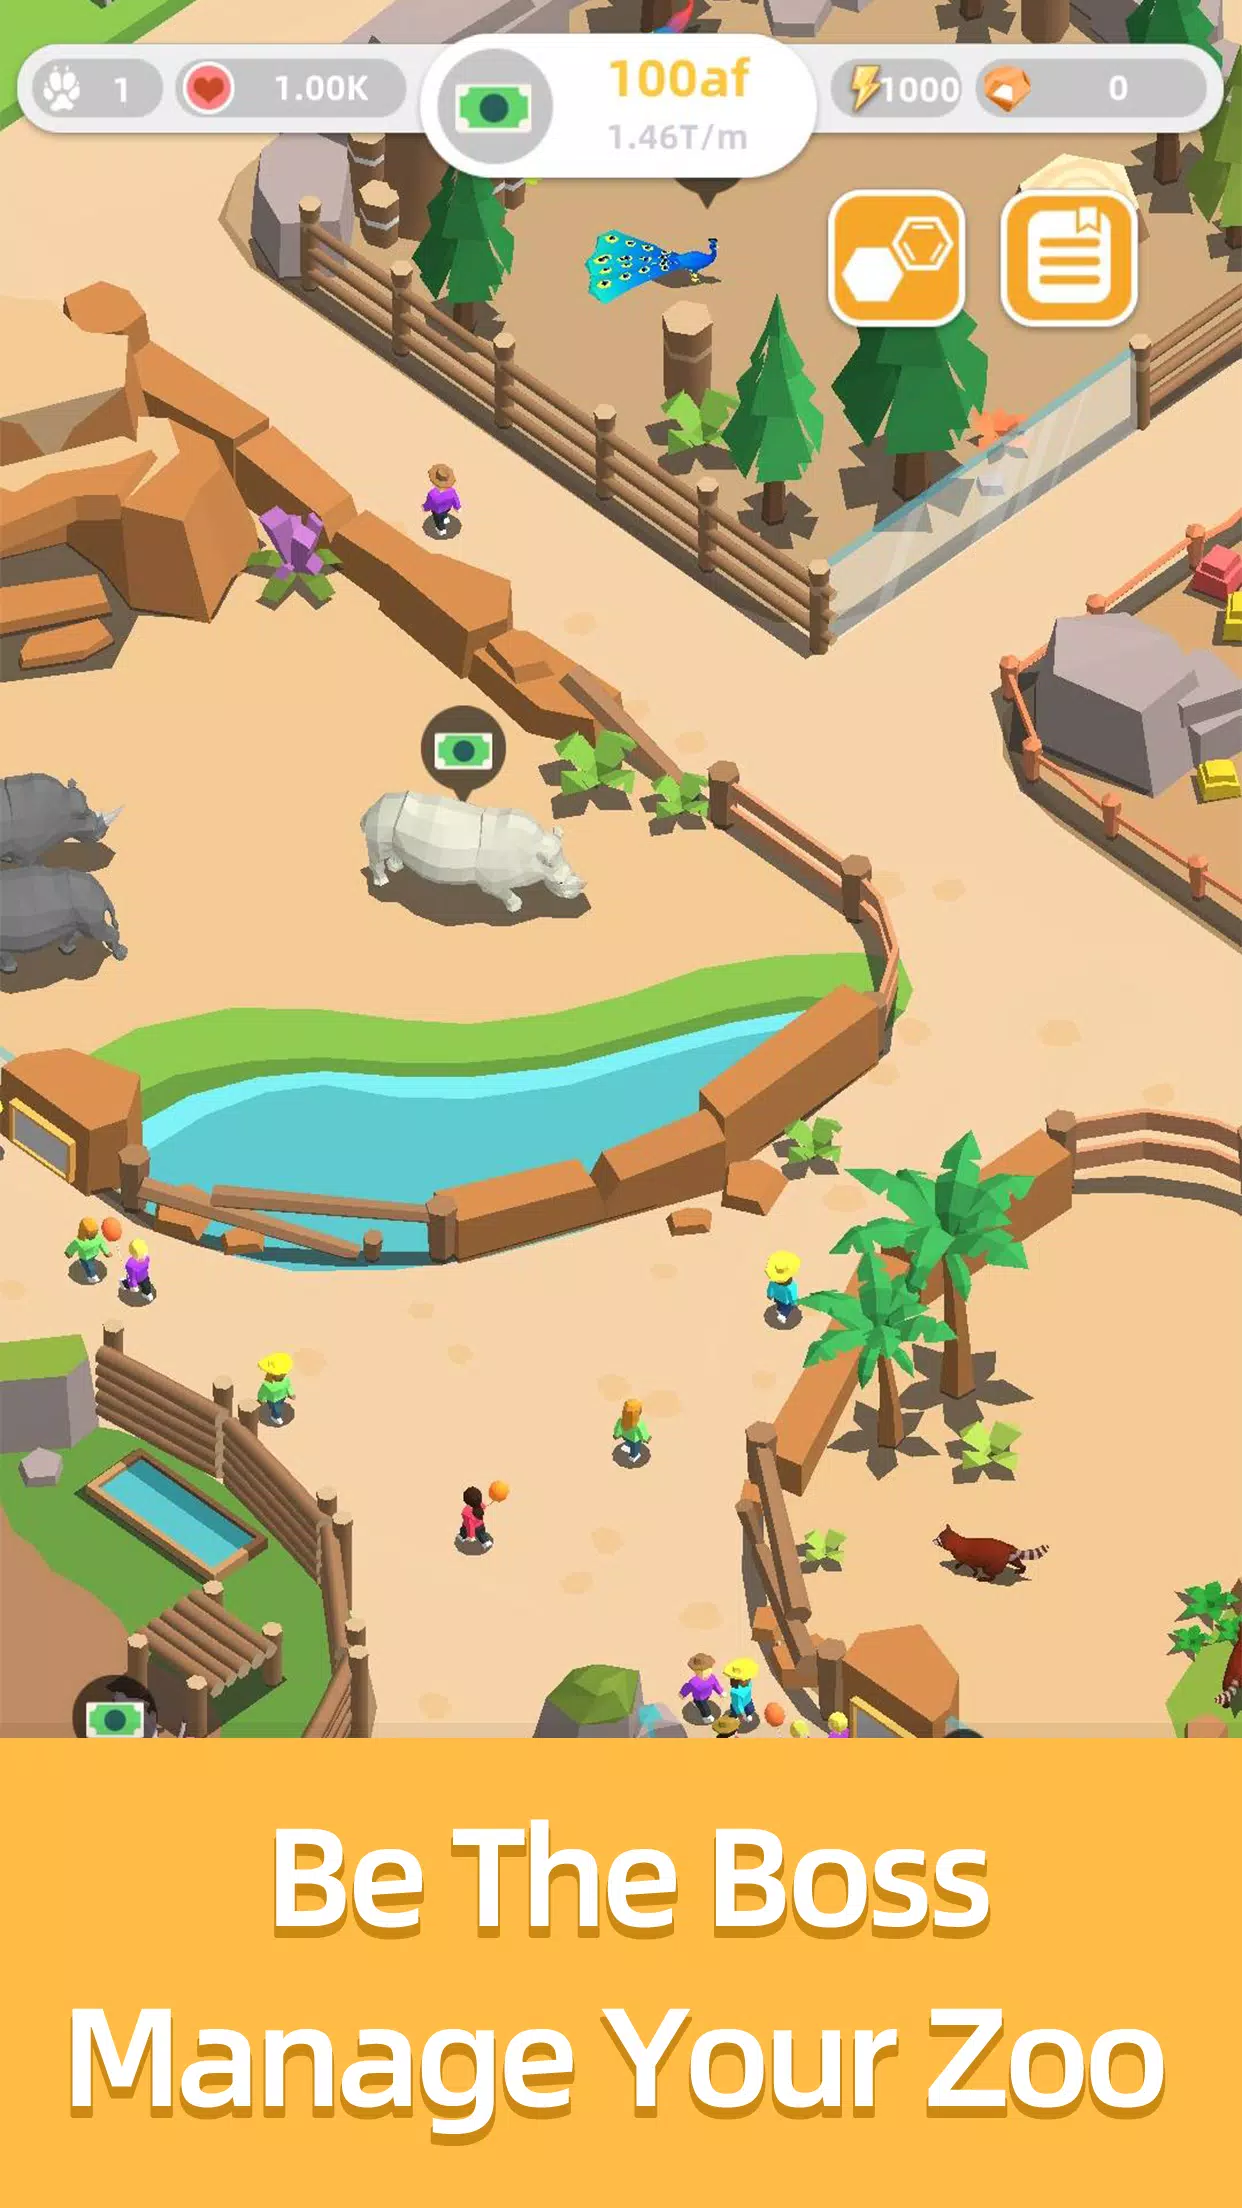 Dinosaur Park: Primeval Zoo, the dino park tycoon game, is out now on iOS  following success on Android